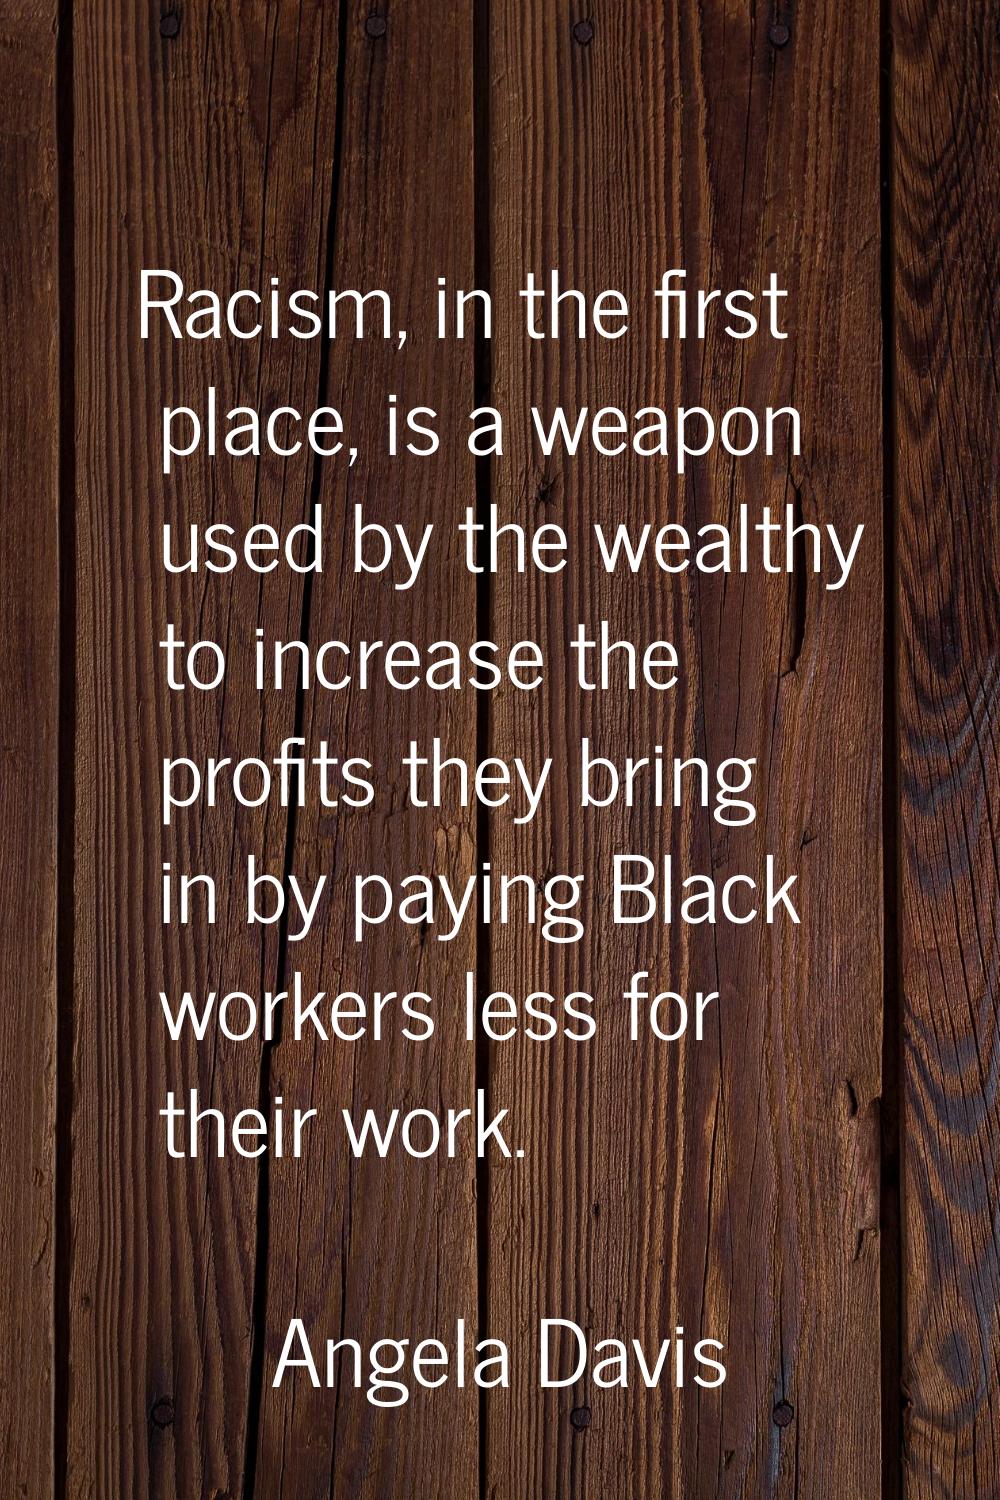 Racism, in the first place, is a weapon used by the wealthy to increase the profits they bring in b